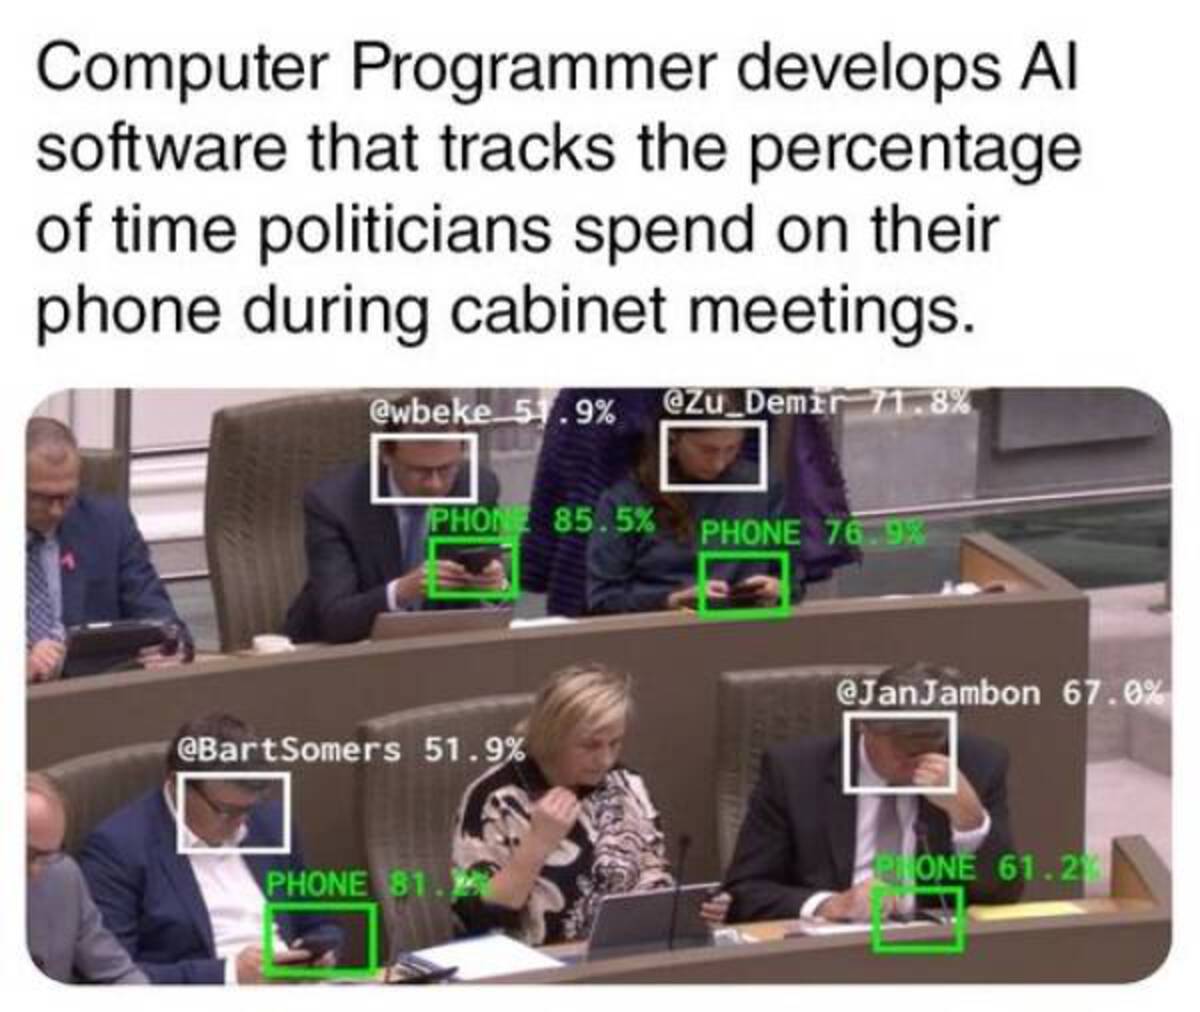 presentation - Computer Programmer develops Al software that tracks the percentage of time politicians spend on their phone during cabinet meetings. 5.9% 71.8% Phone 85.5% Phone 76.9% 51.9% Phone 81. 67.0% Phone 61.2%